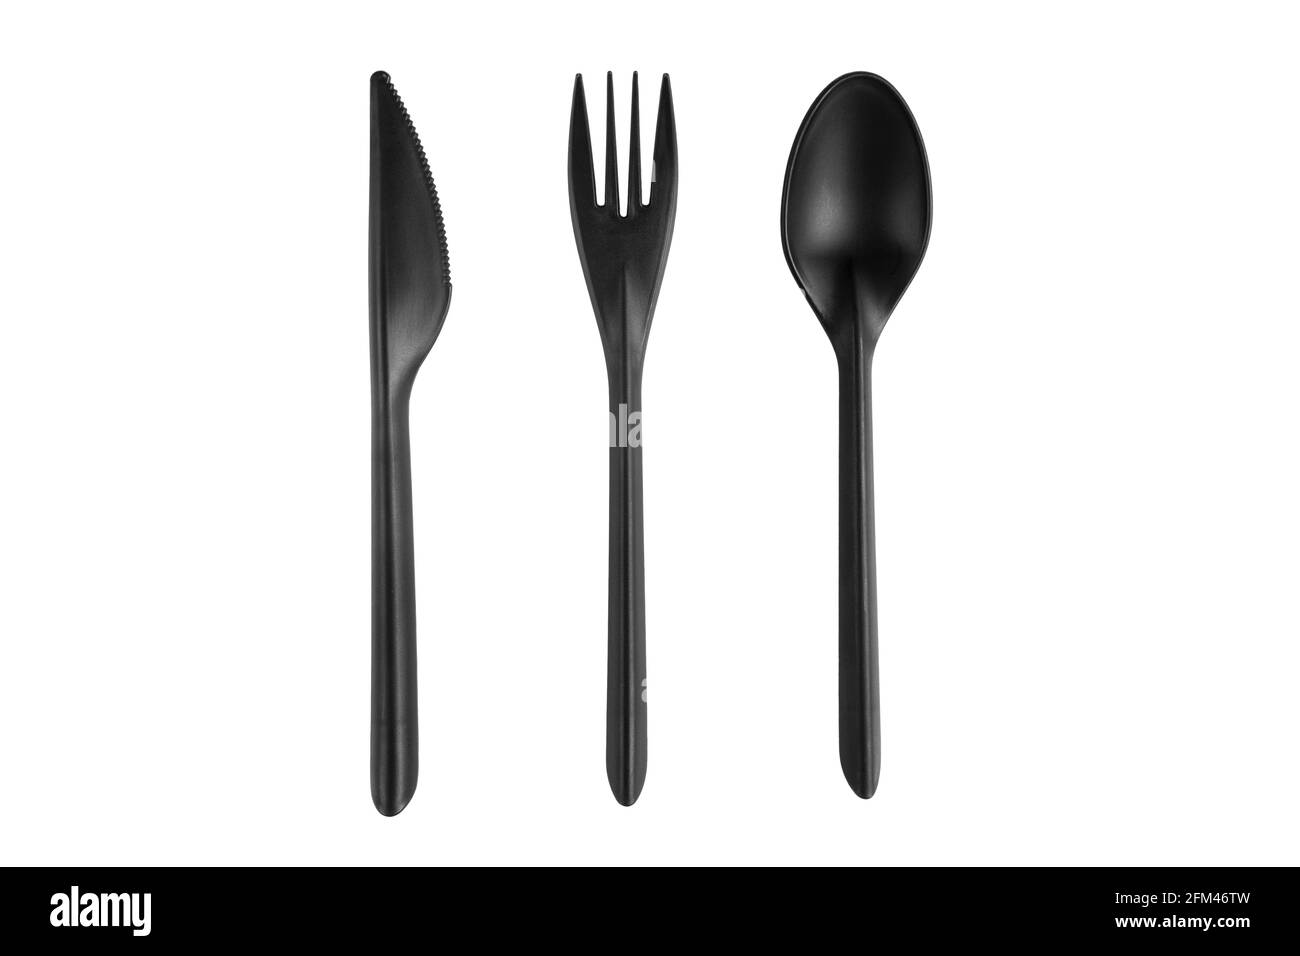 Black plastic spoon, knife and fork isolated on white background. Disposable tableware set isolated with clipping path. Stock Photo